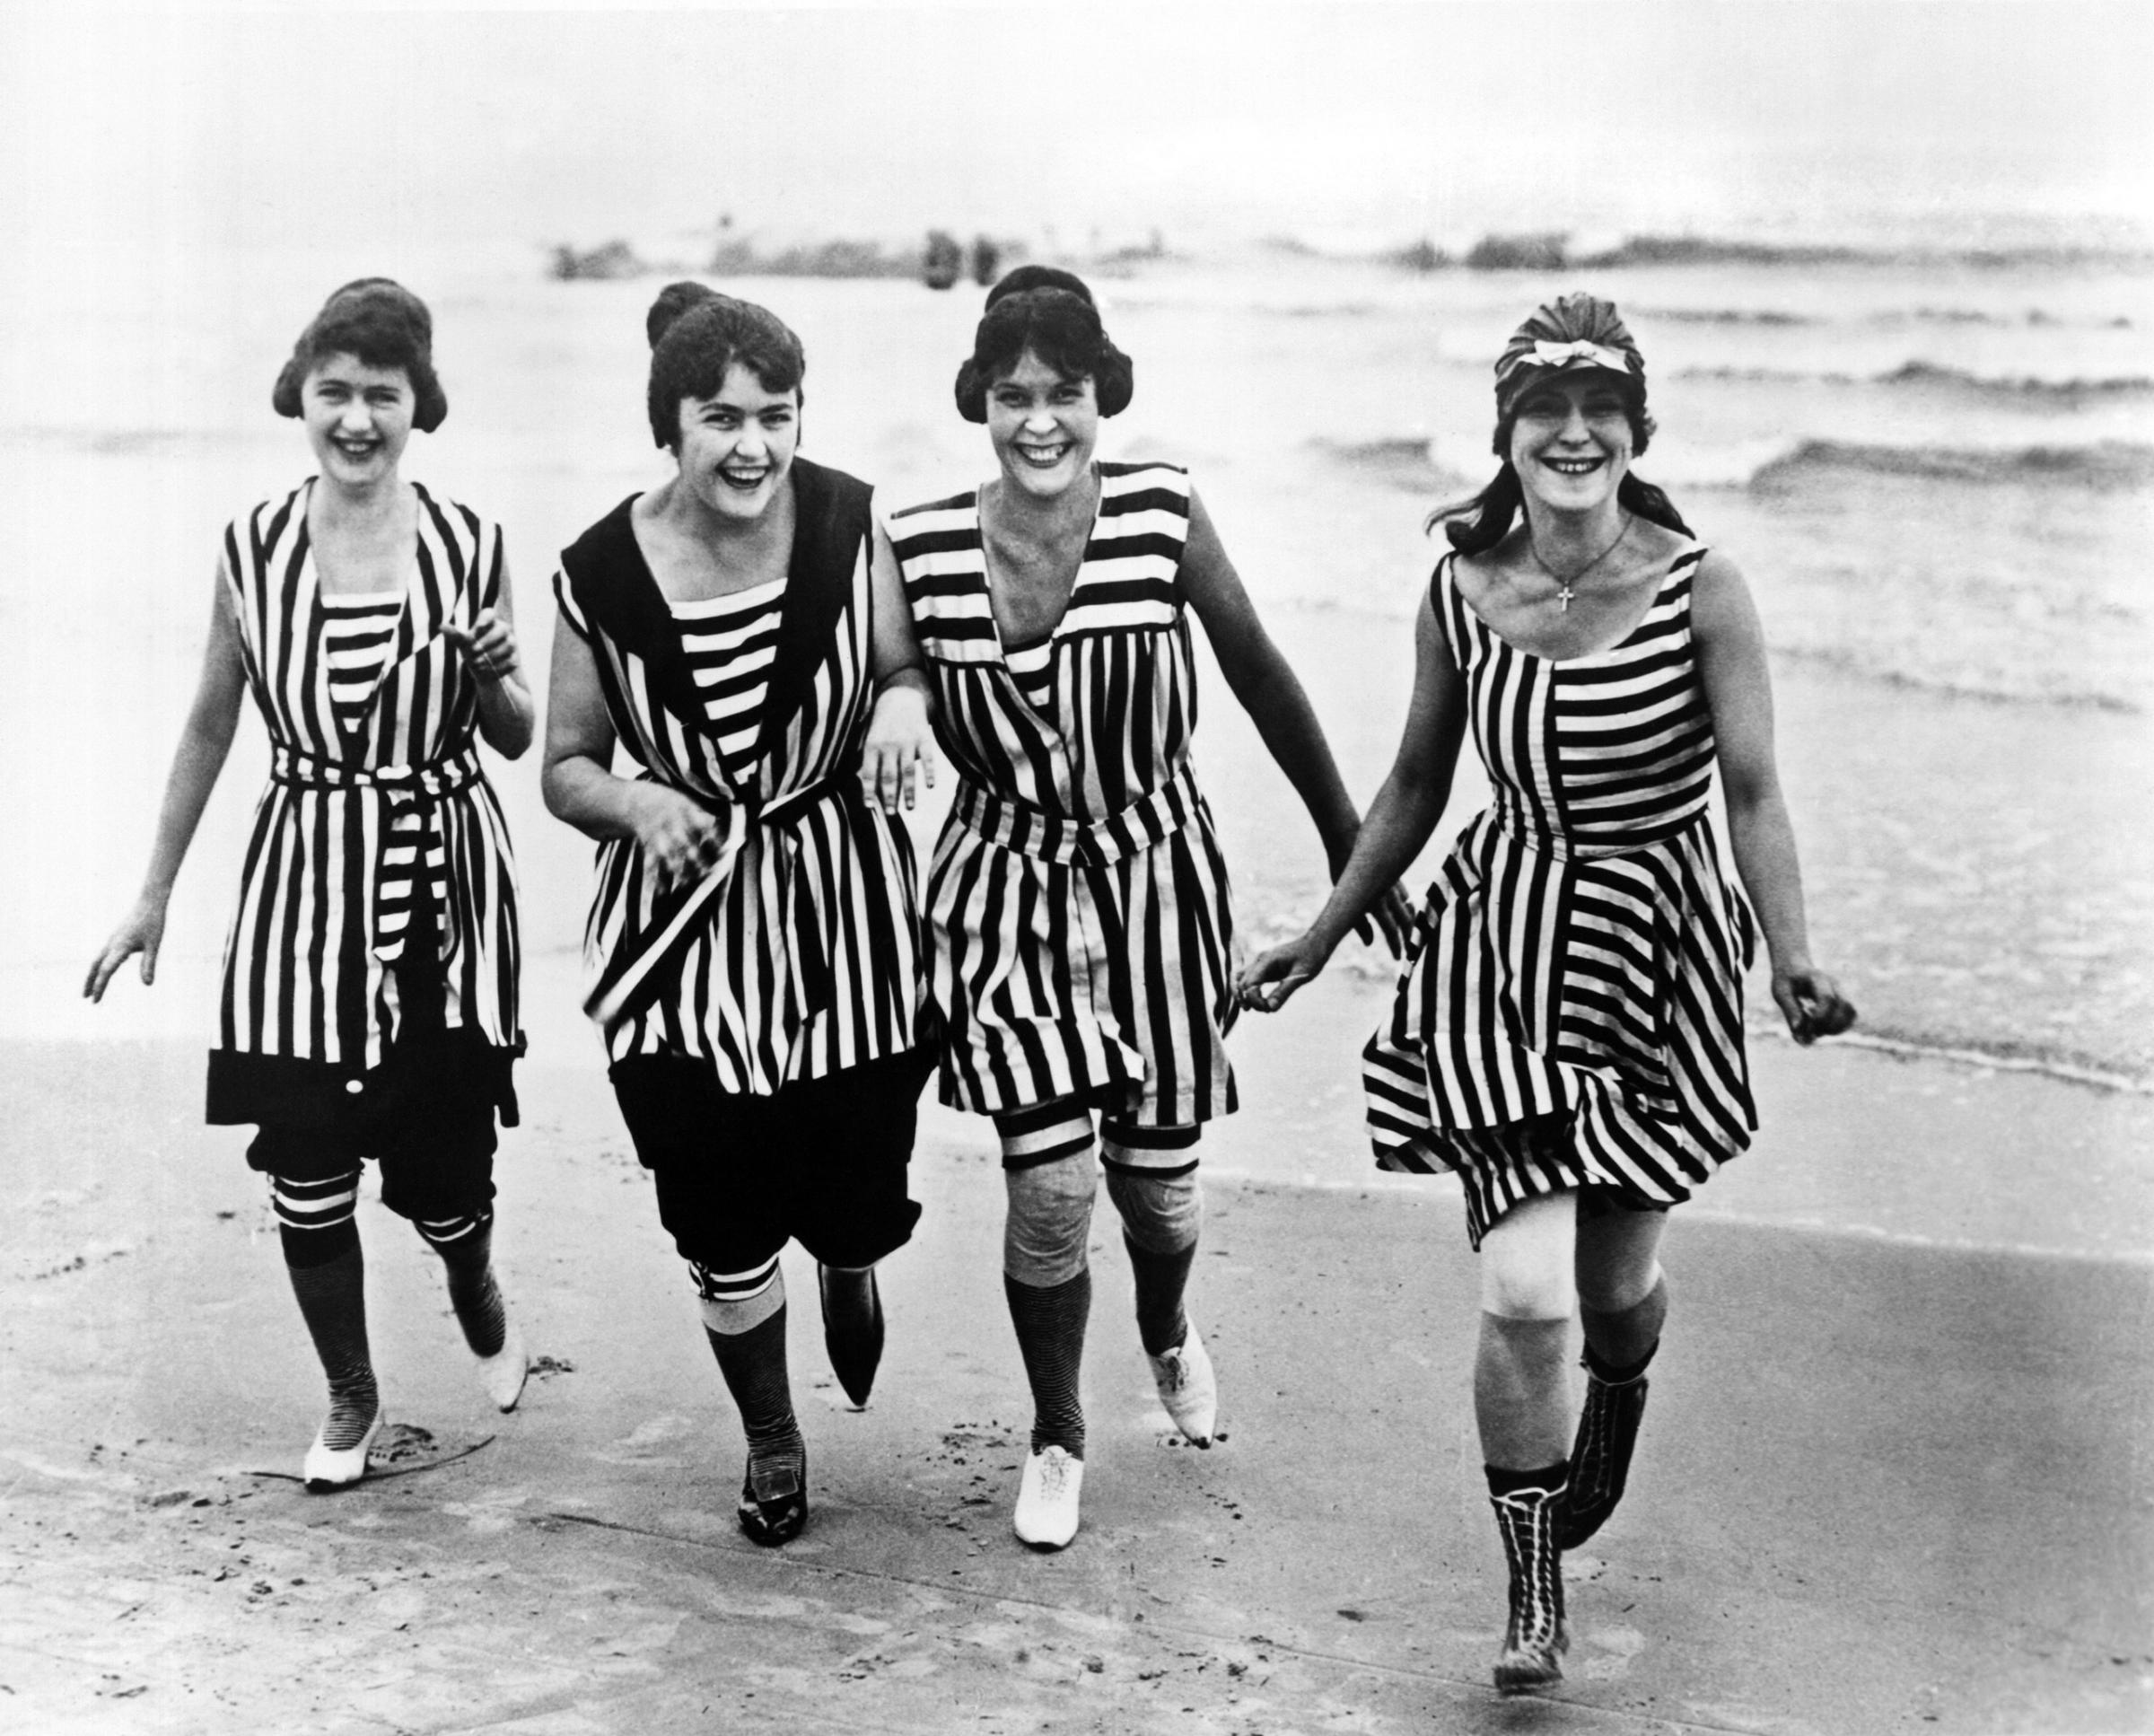 Four young women in matching beach wear run out of the surf, Los Angeles, California, circa 1910.